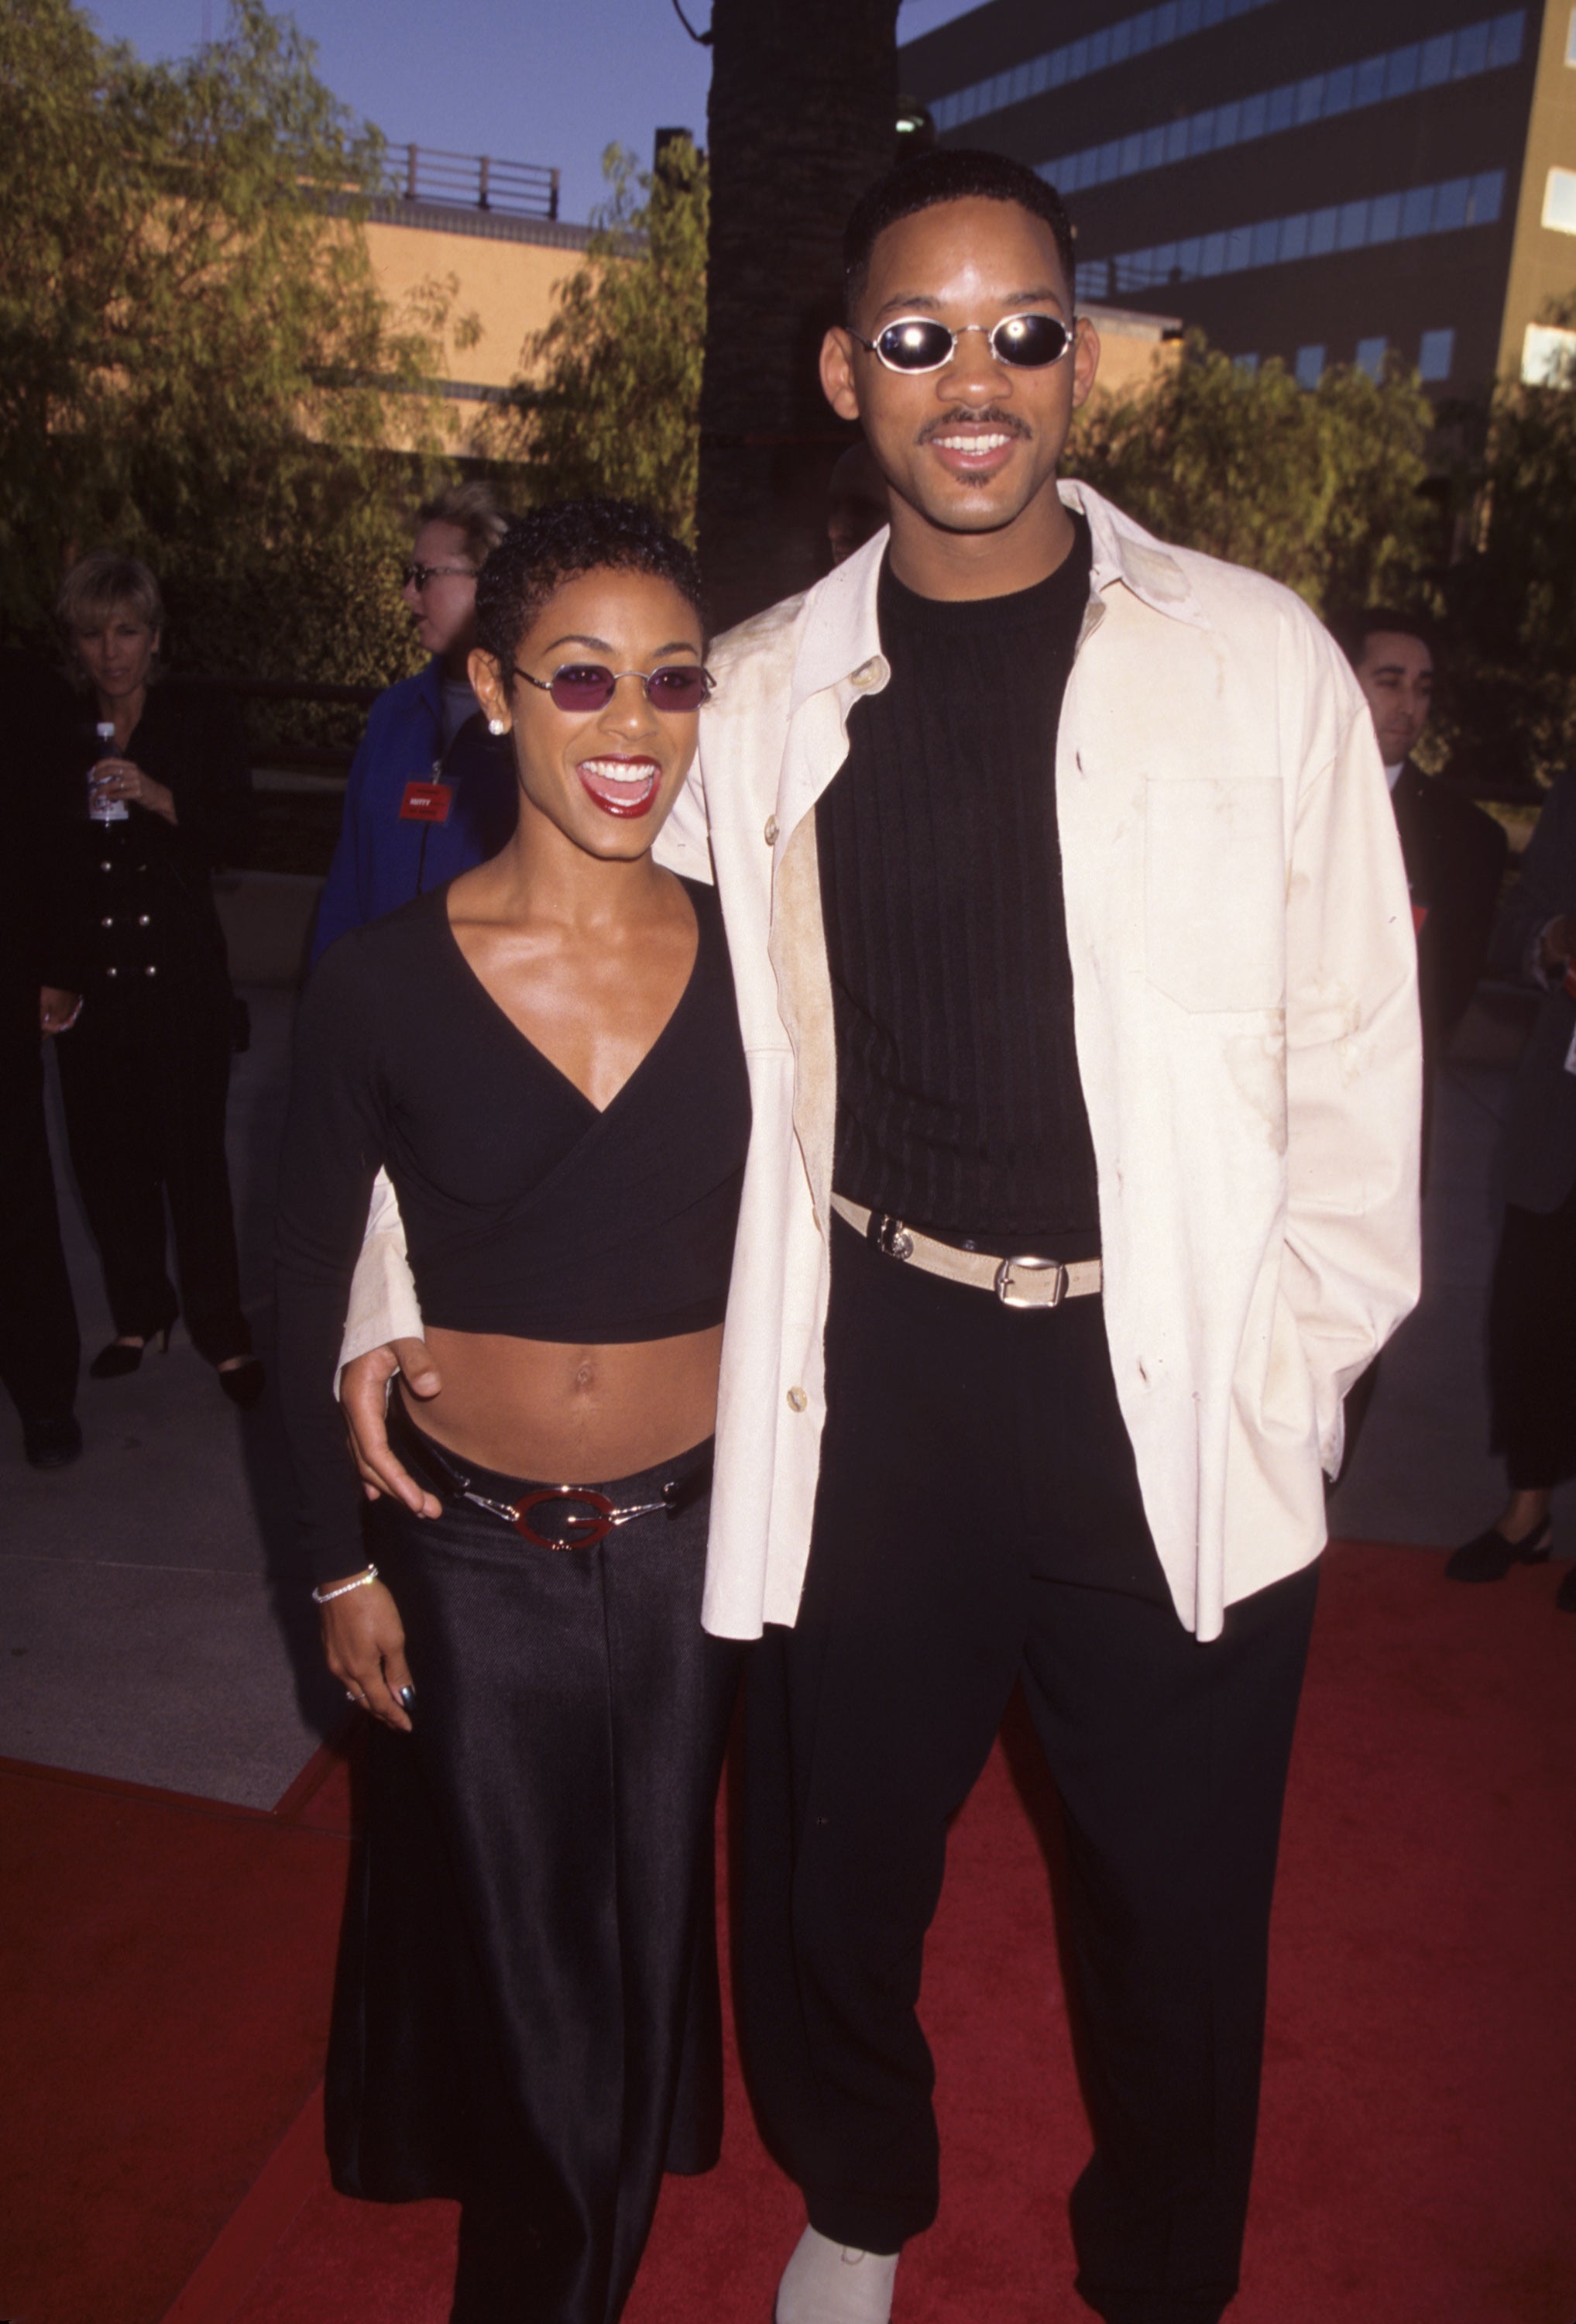 Cheers To 20 Beautiful Years: Will Smith And Jada Pinkett Smith's Love Then And Now
